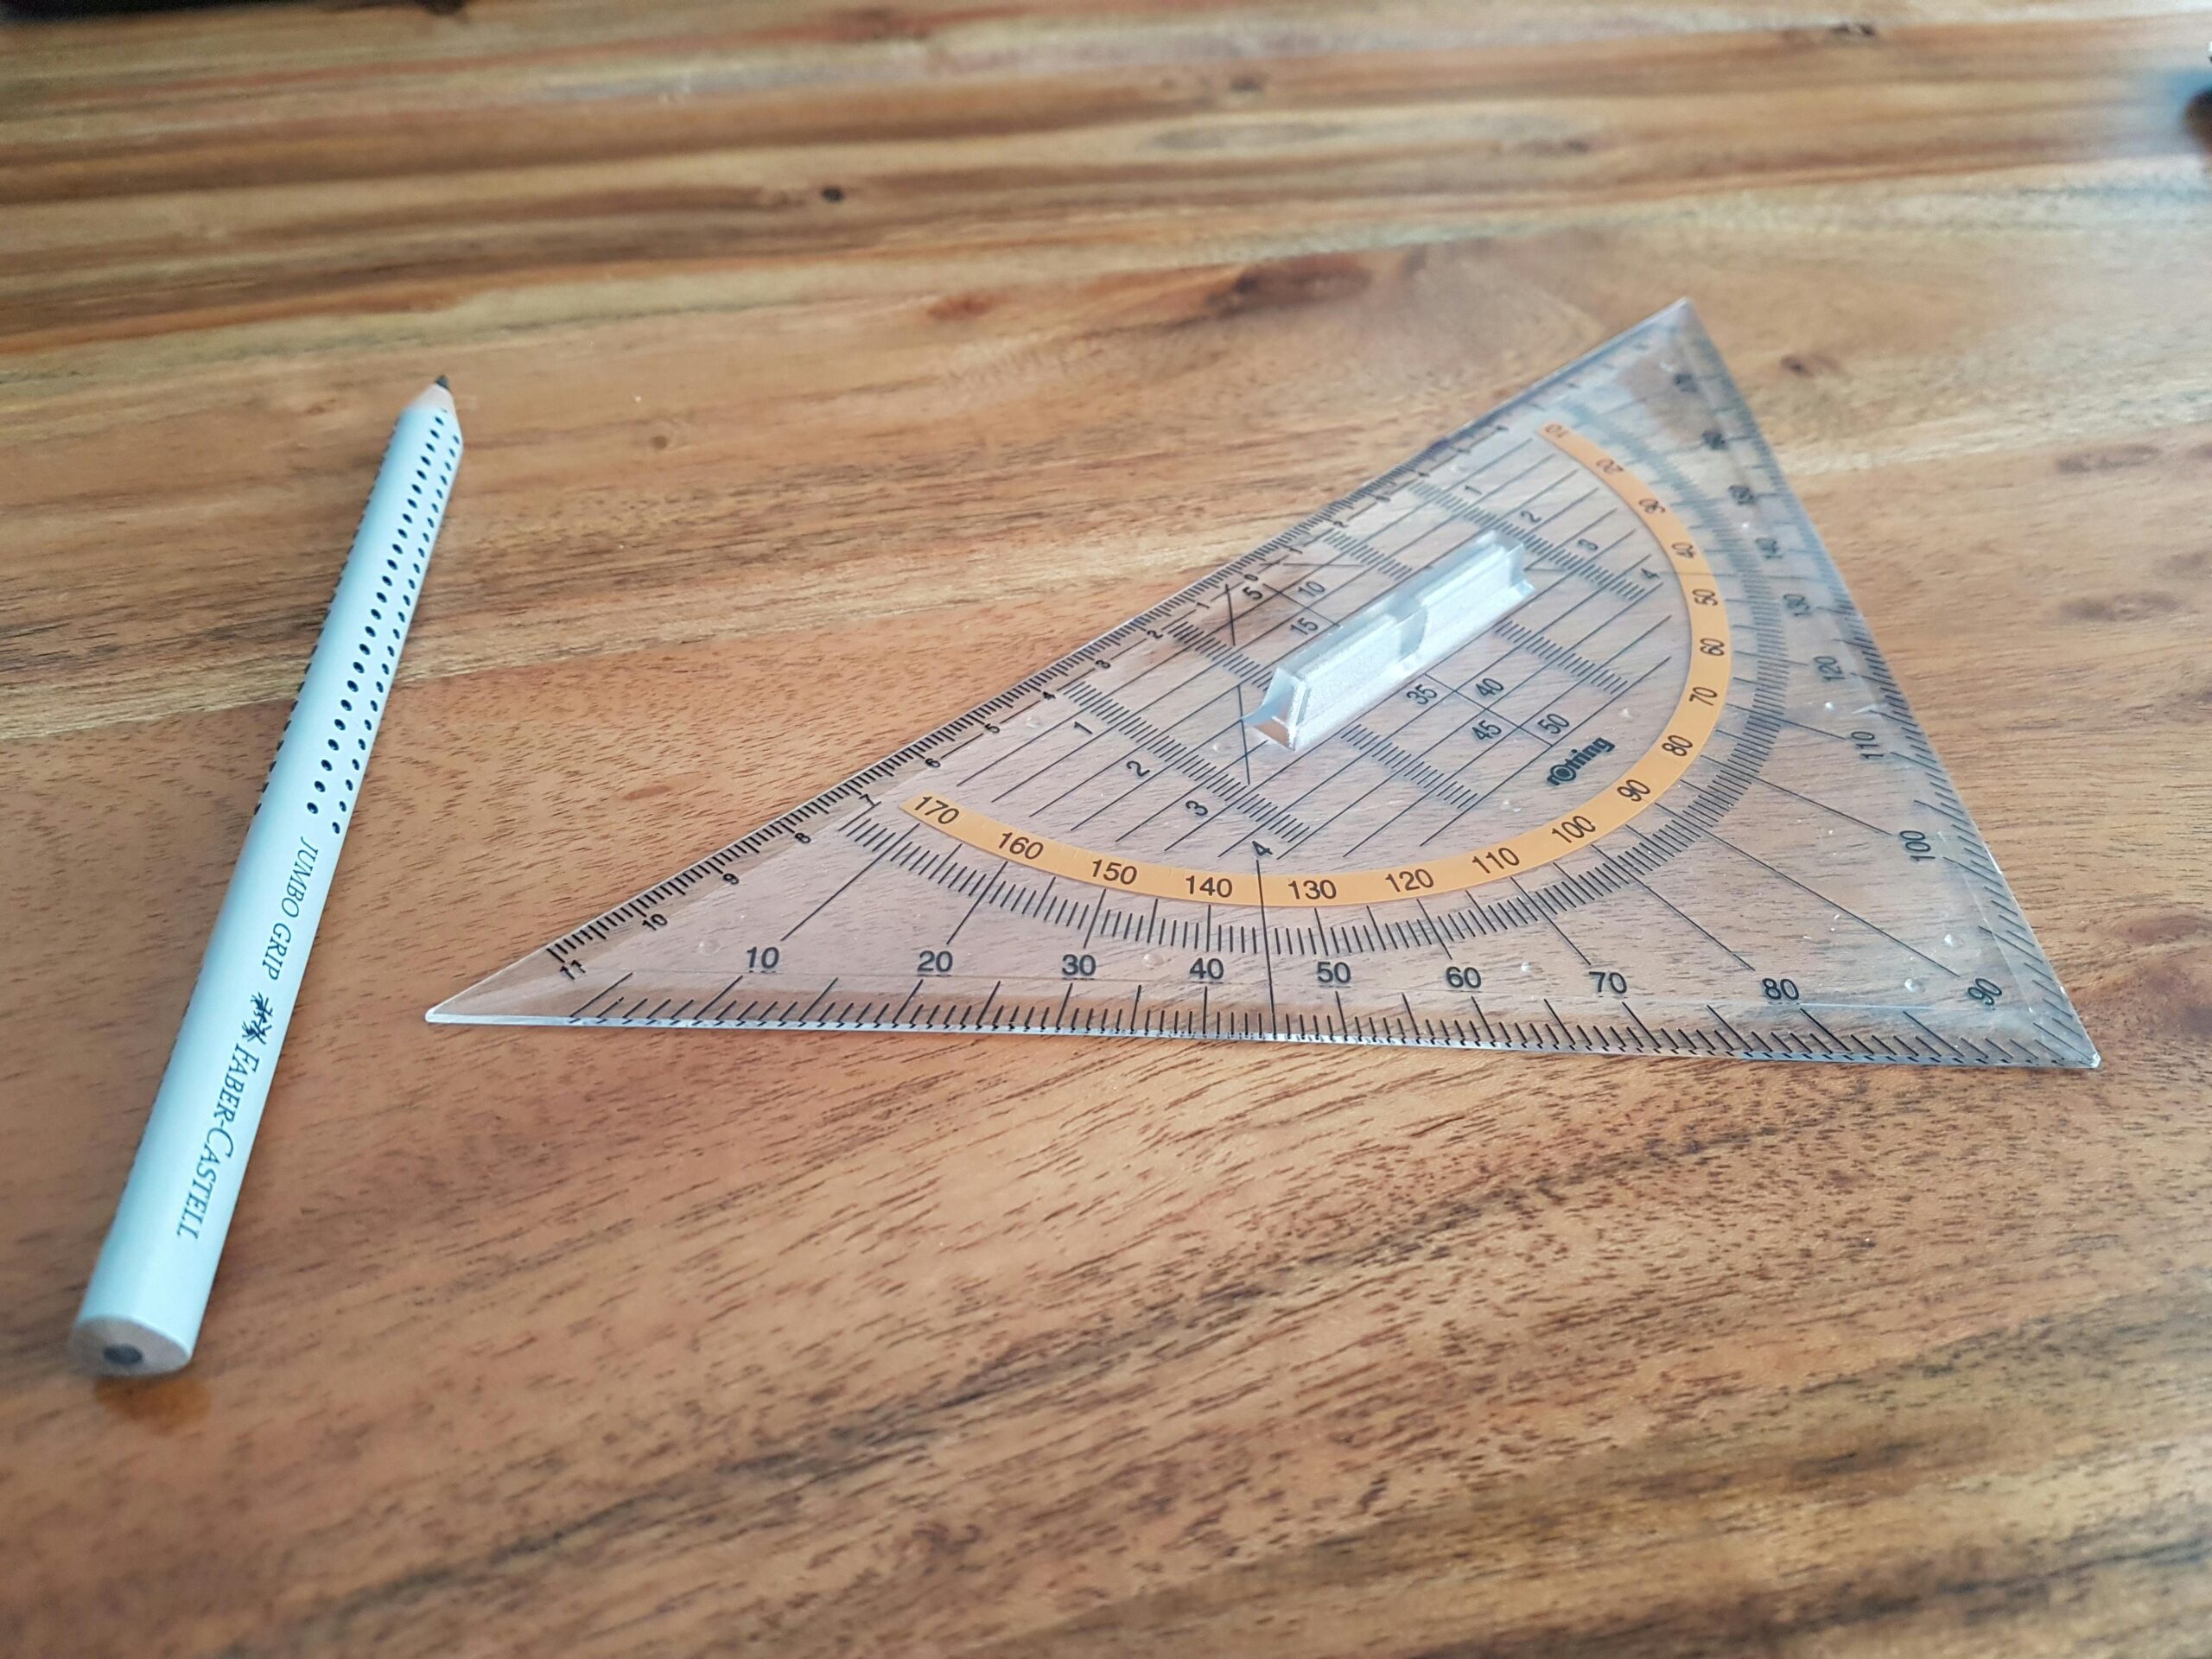 Gray Pencil and Triangular Ruler on Brown Wooden Surface